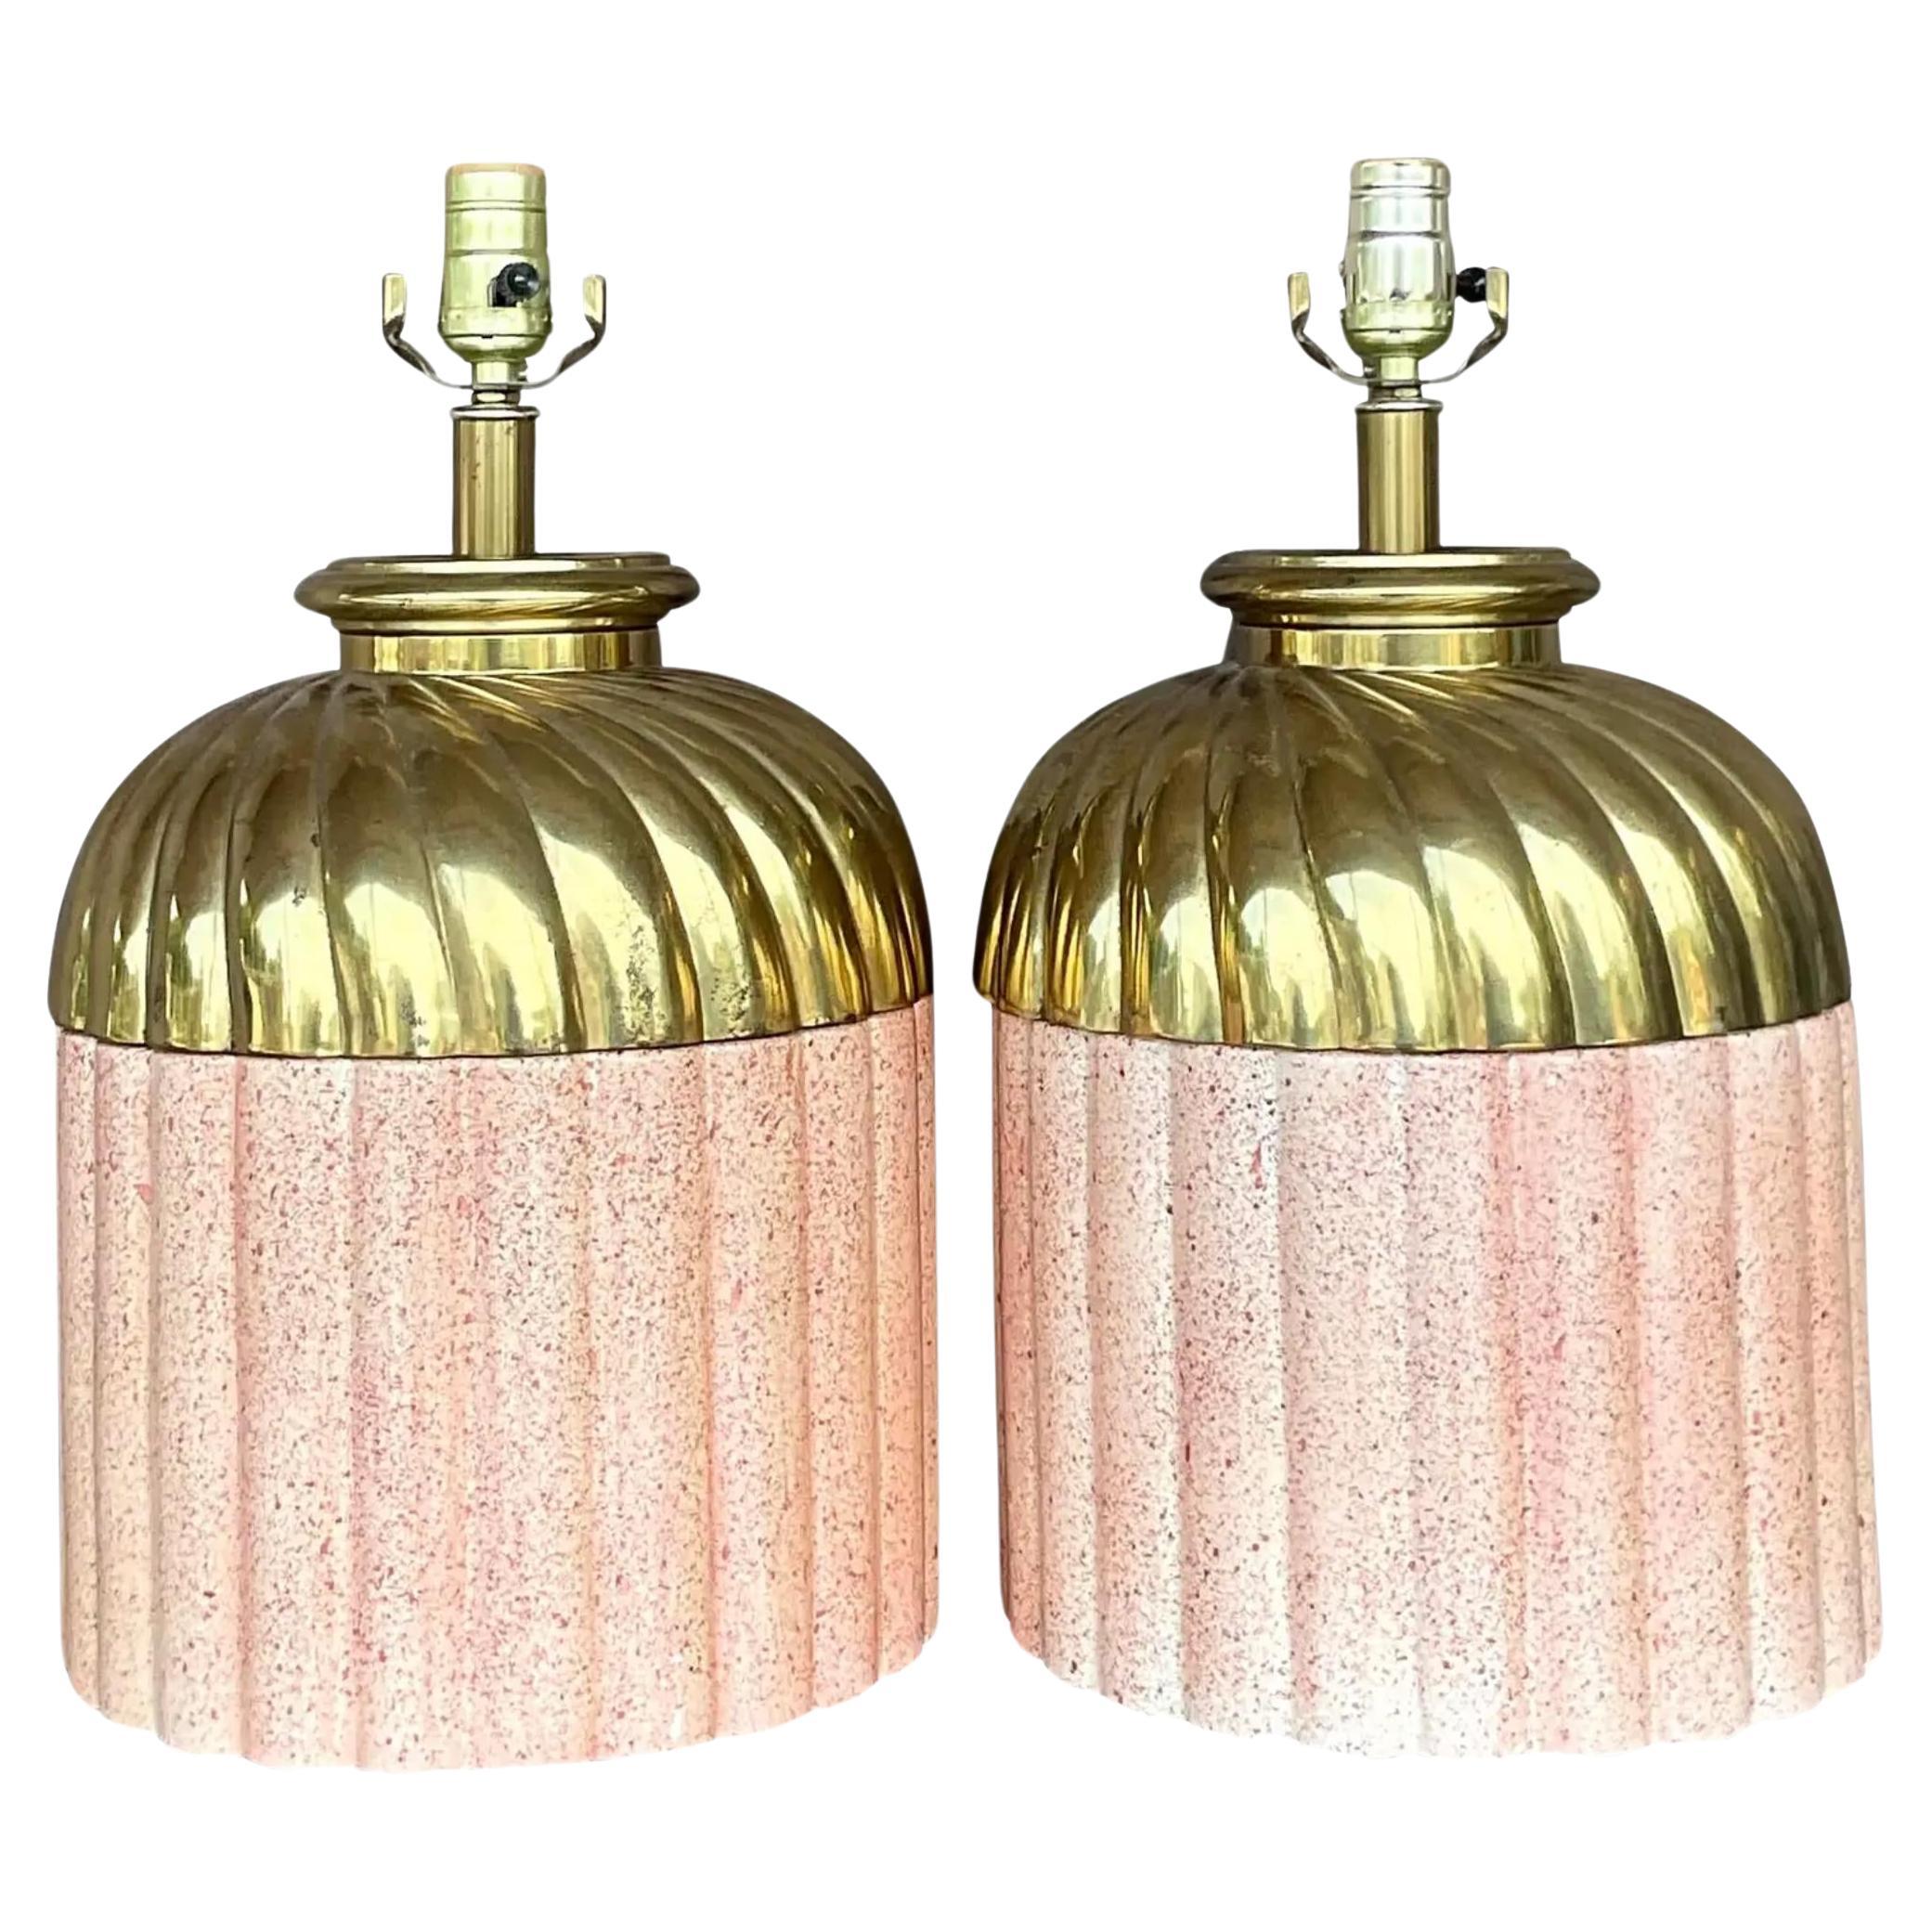 Vintage Boho Brass and Ceramic Lamps - a Pair For Sale